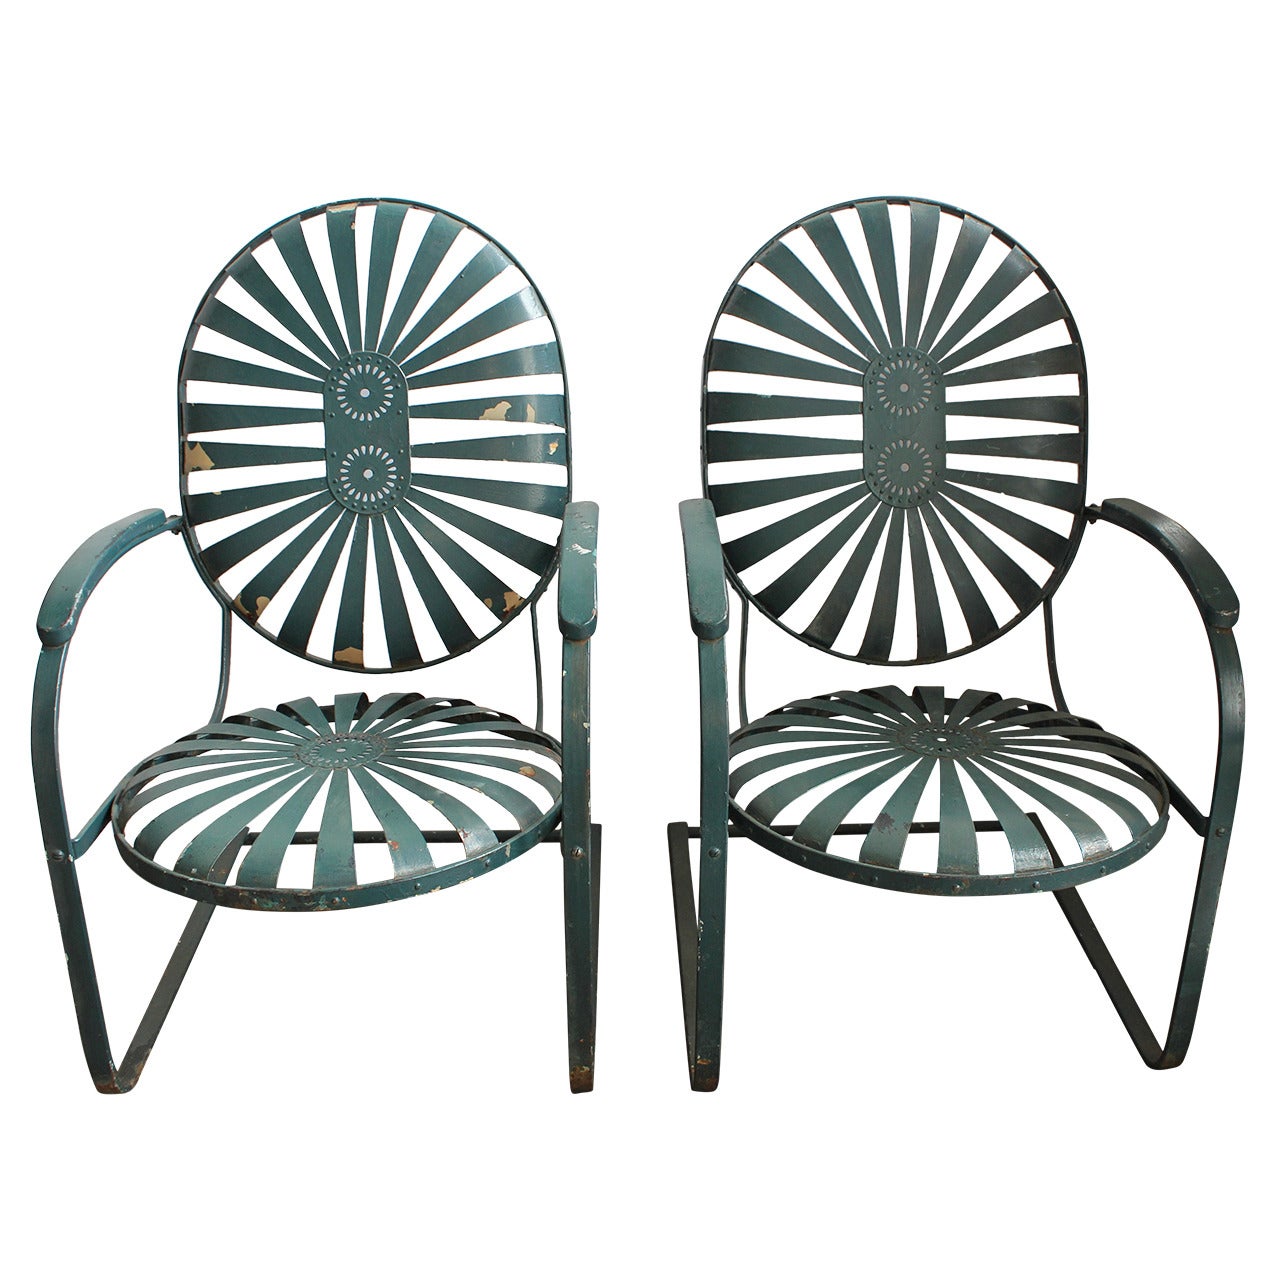 1930s French Garden Lounge Chairs by Carre